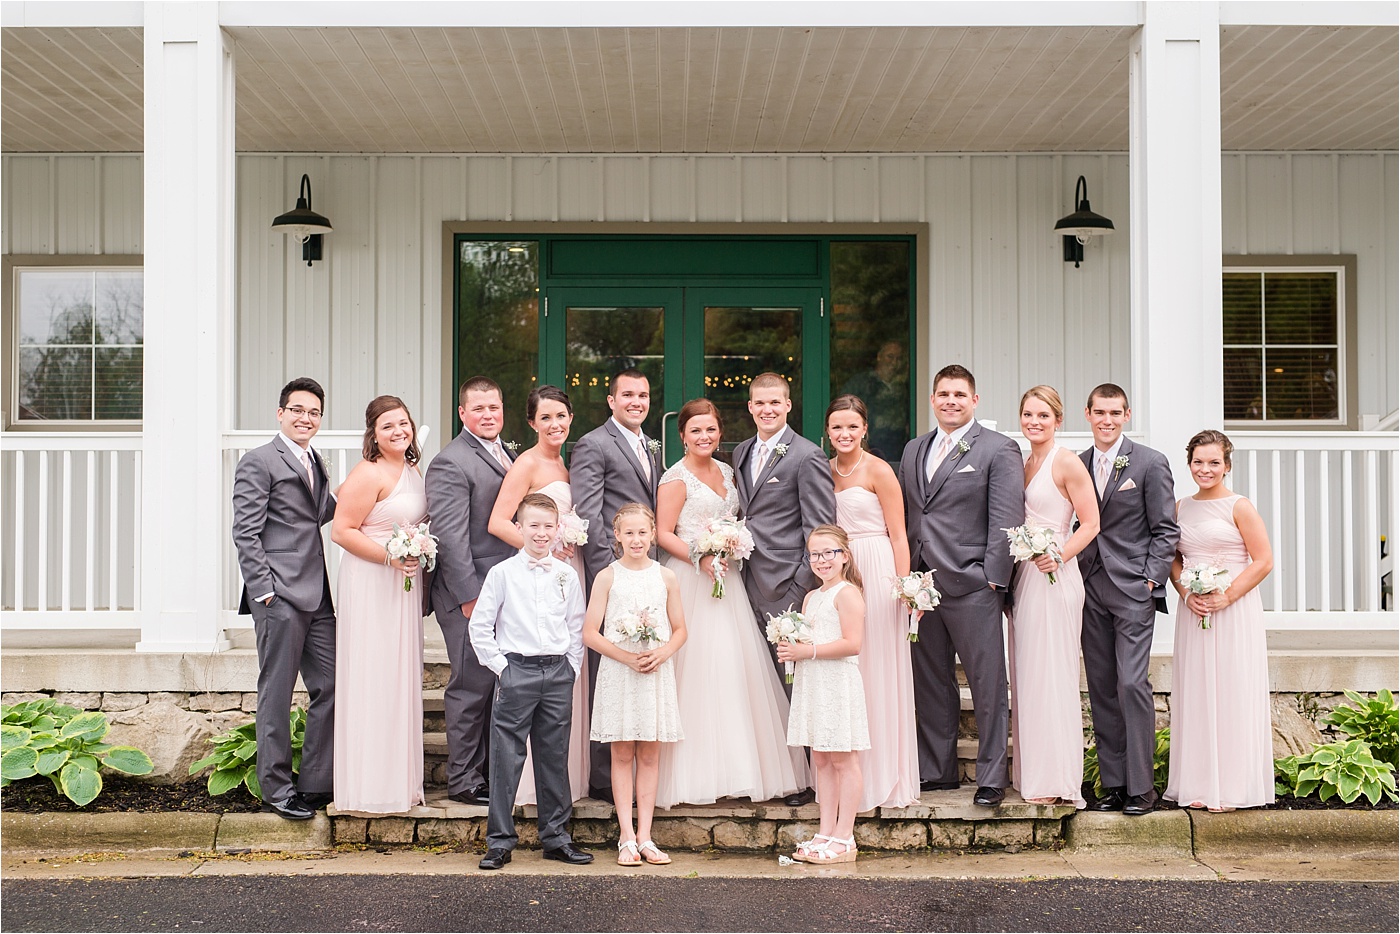 A Blush Outdoor wedding at Irongate Equestrian | KariMe Photography_0100